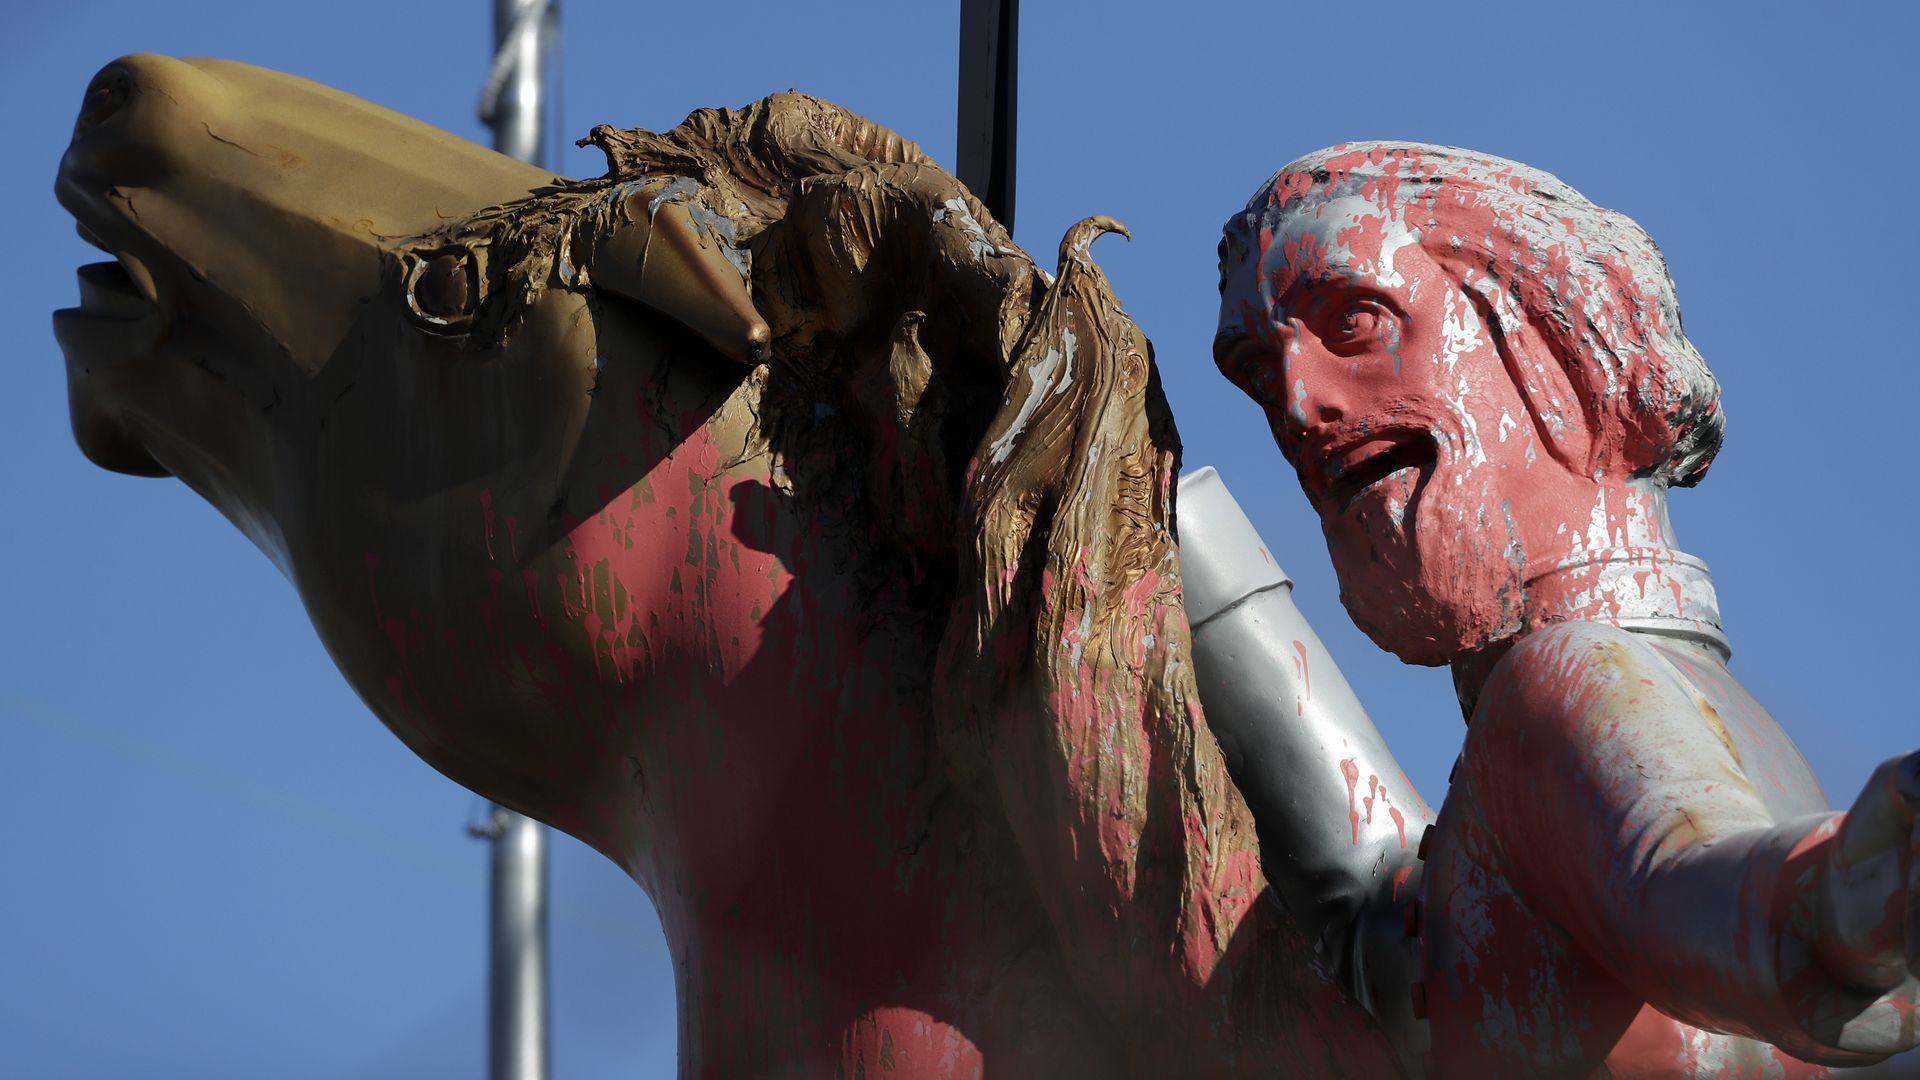 A statue of Nathan Bedford Forrest grinning and riding a horse is splattered with pink paint